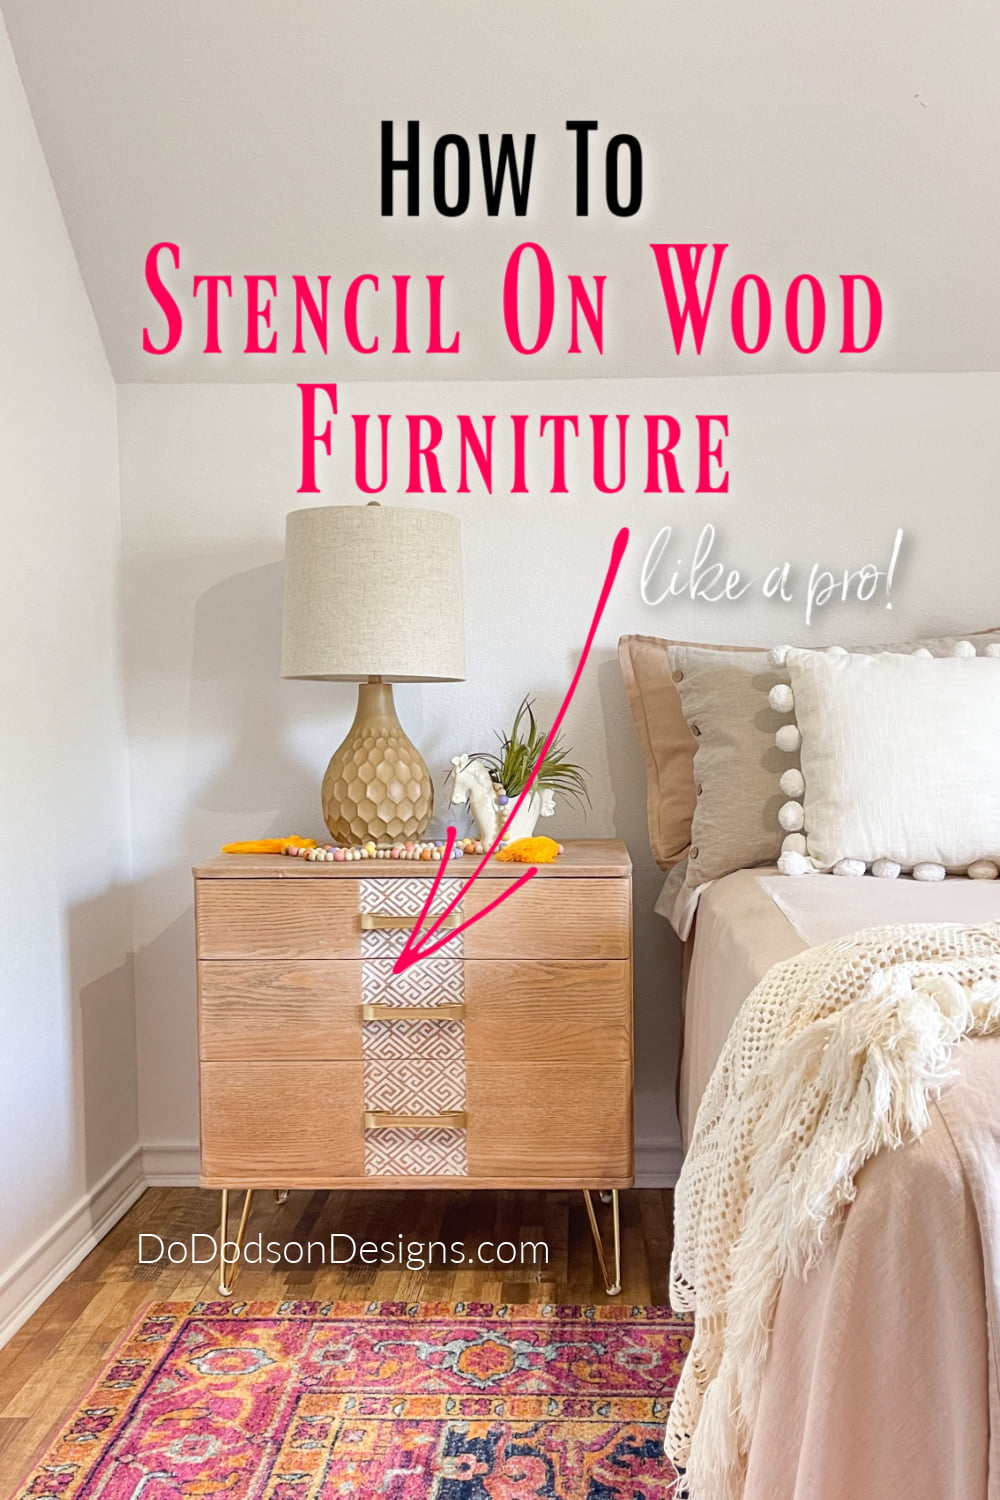 How To Stencil On Wood Furniture - MCM Makeover